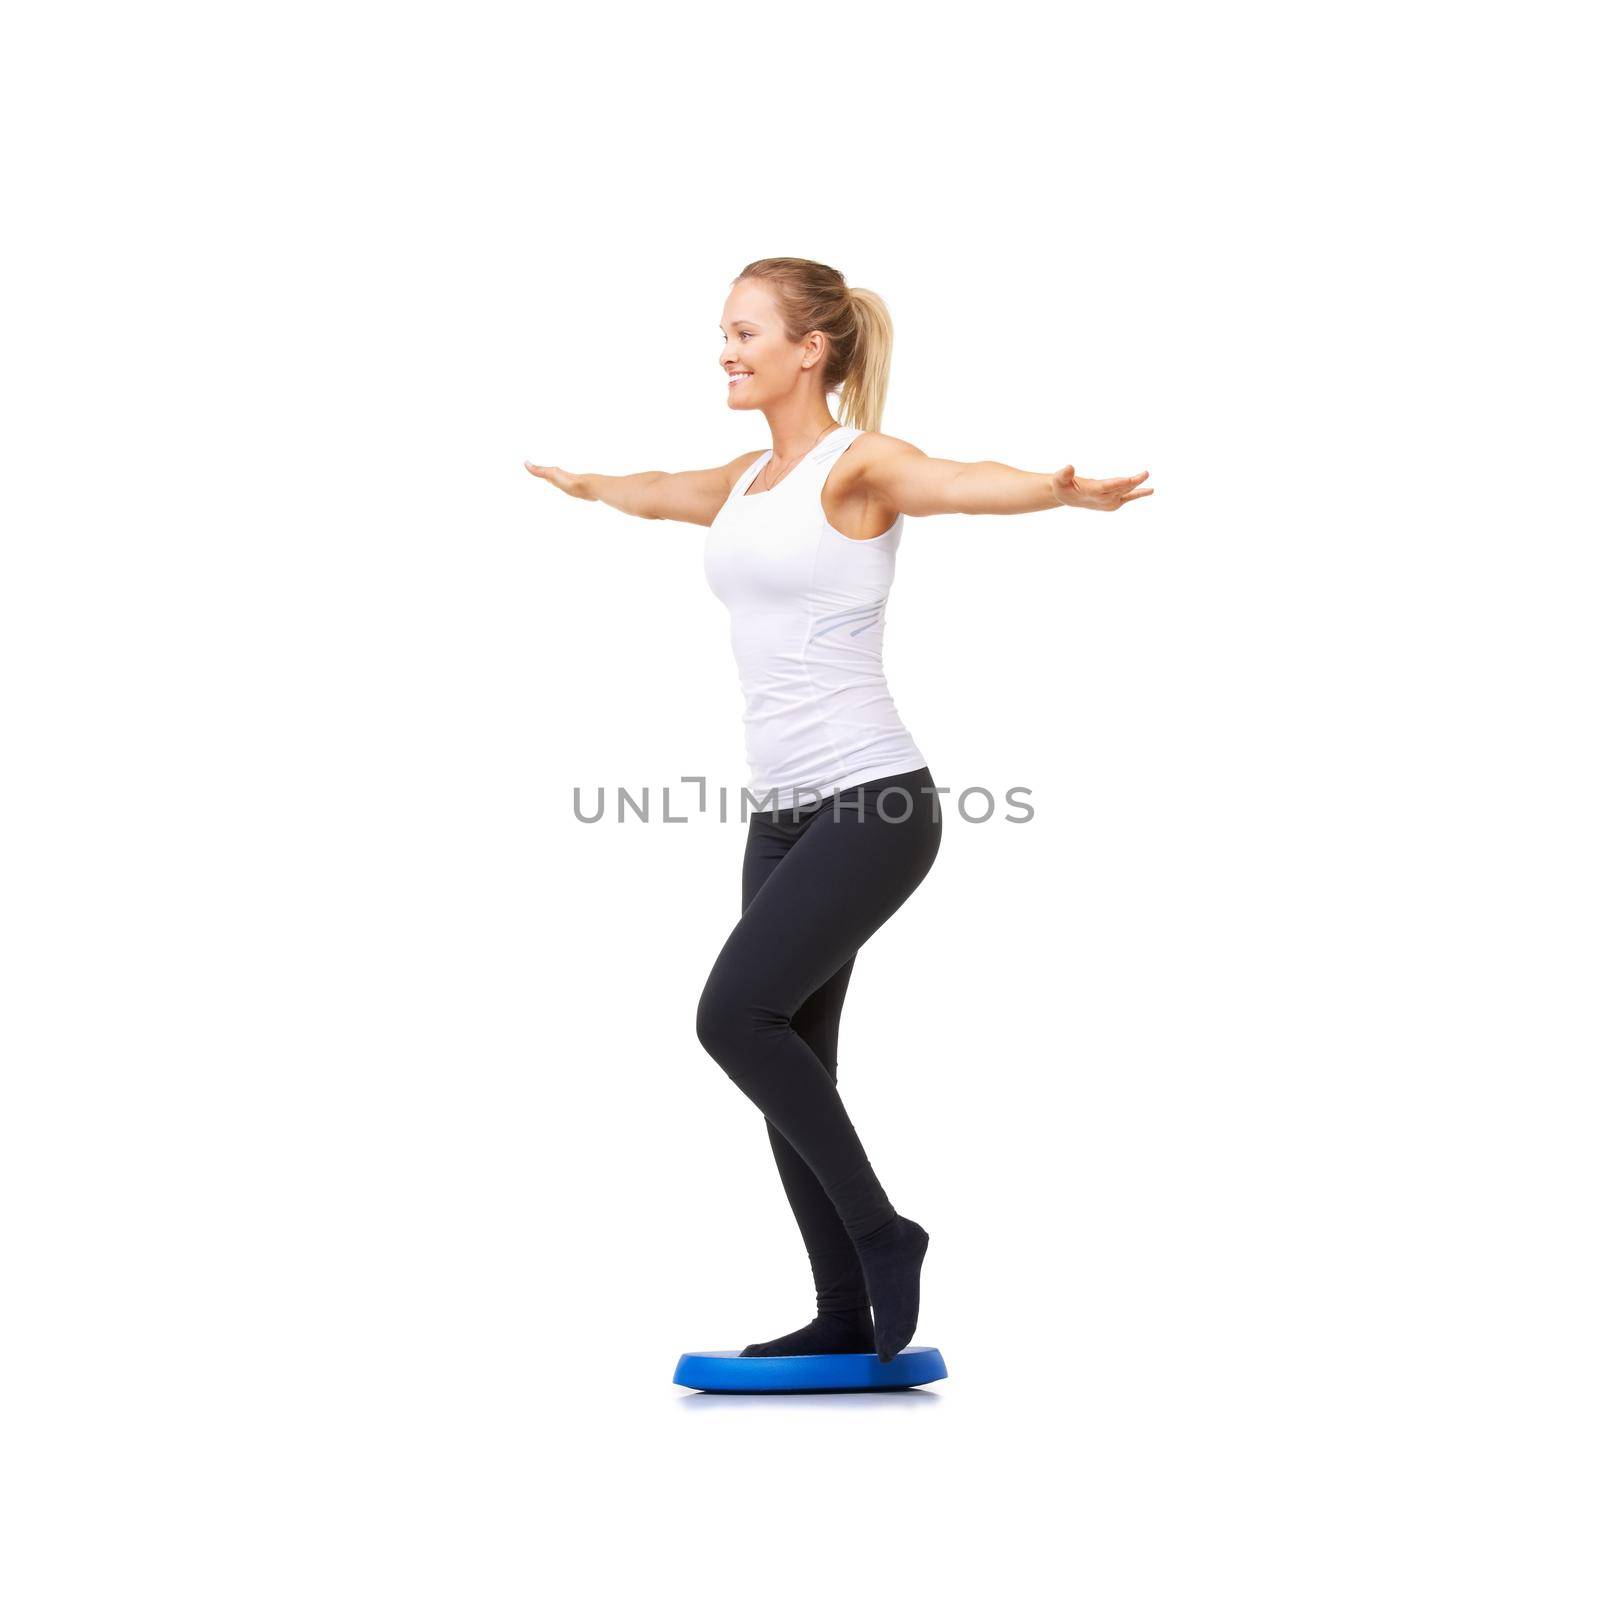 Keeping her footing steady. Full length studio shot of an attractive woman doing balance exercises isolated on white